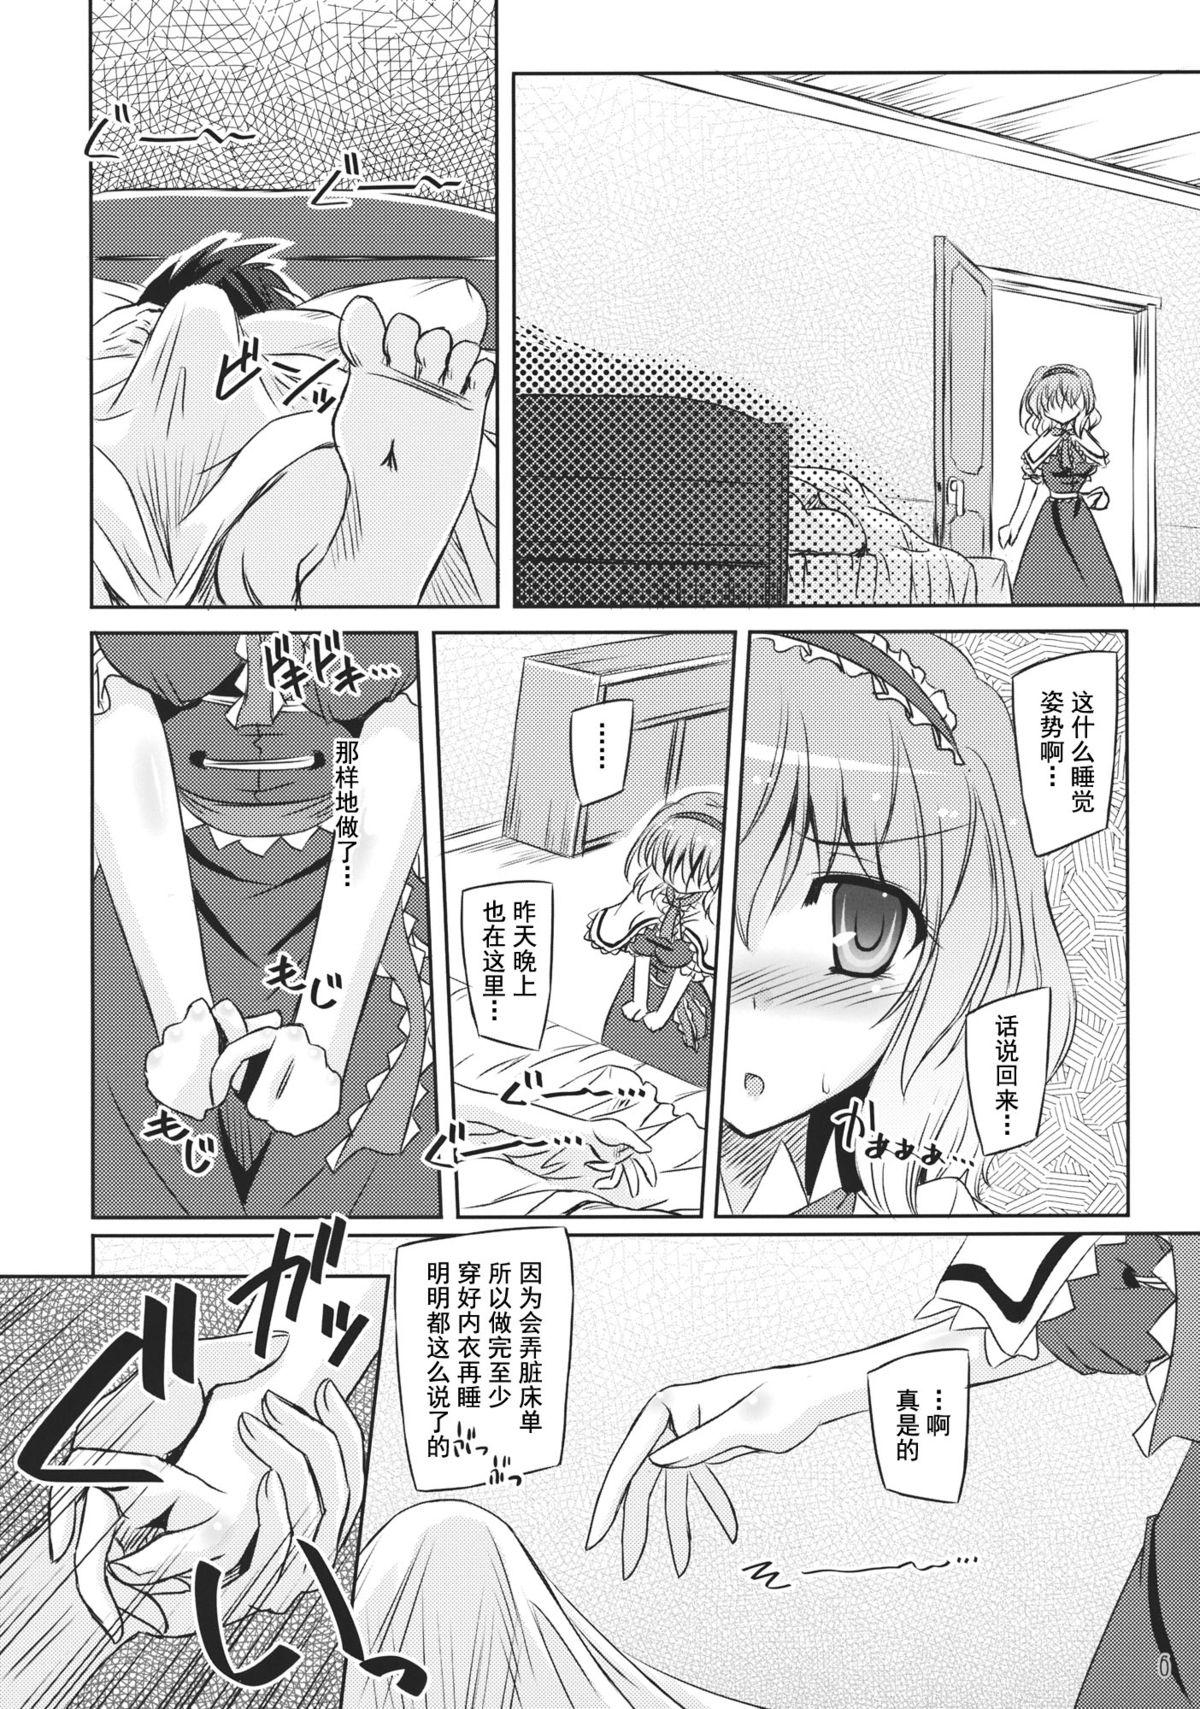 Pounding Loose Strings - Touhou project Secretary - Page 6